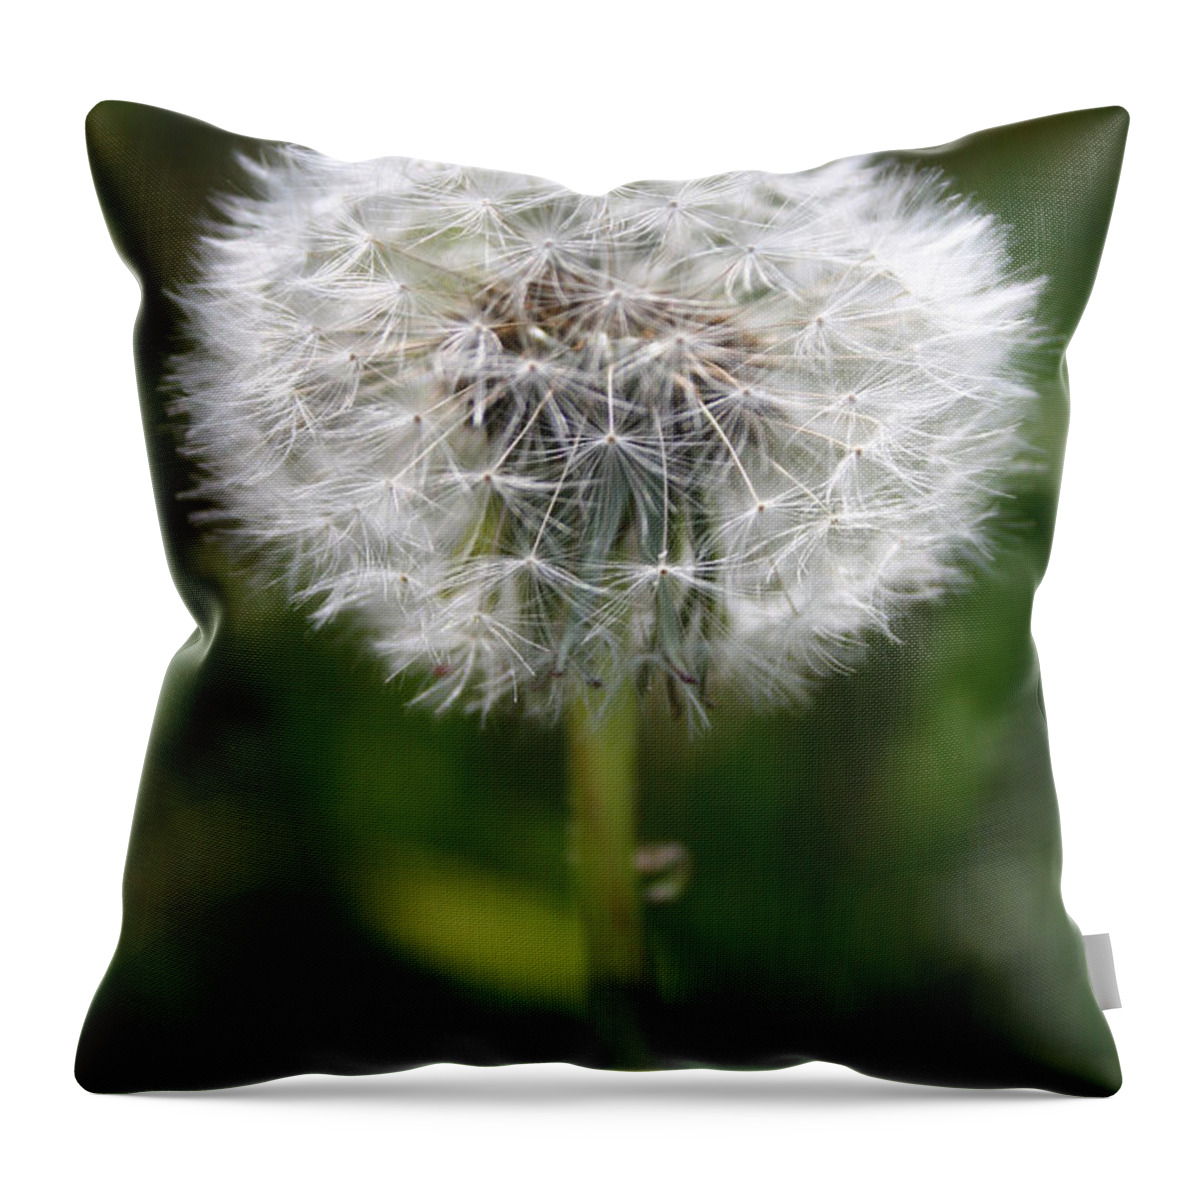 Dandelion Throw Pillow featuring the photograph Make A Wish by Jeanette French